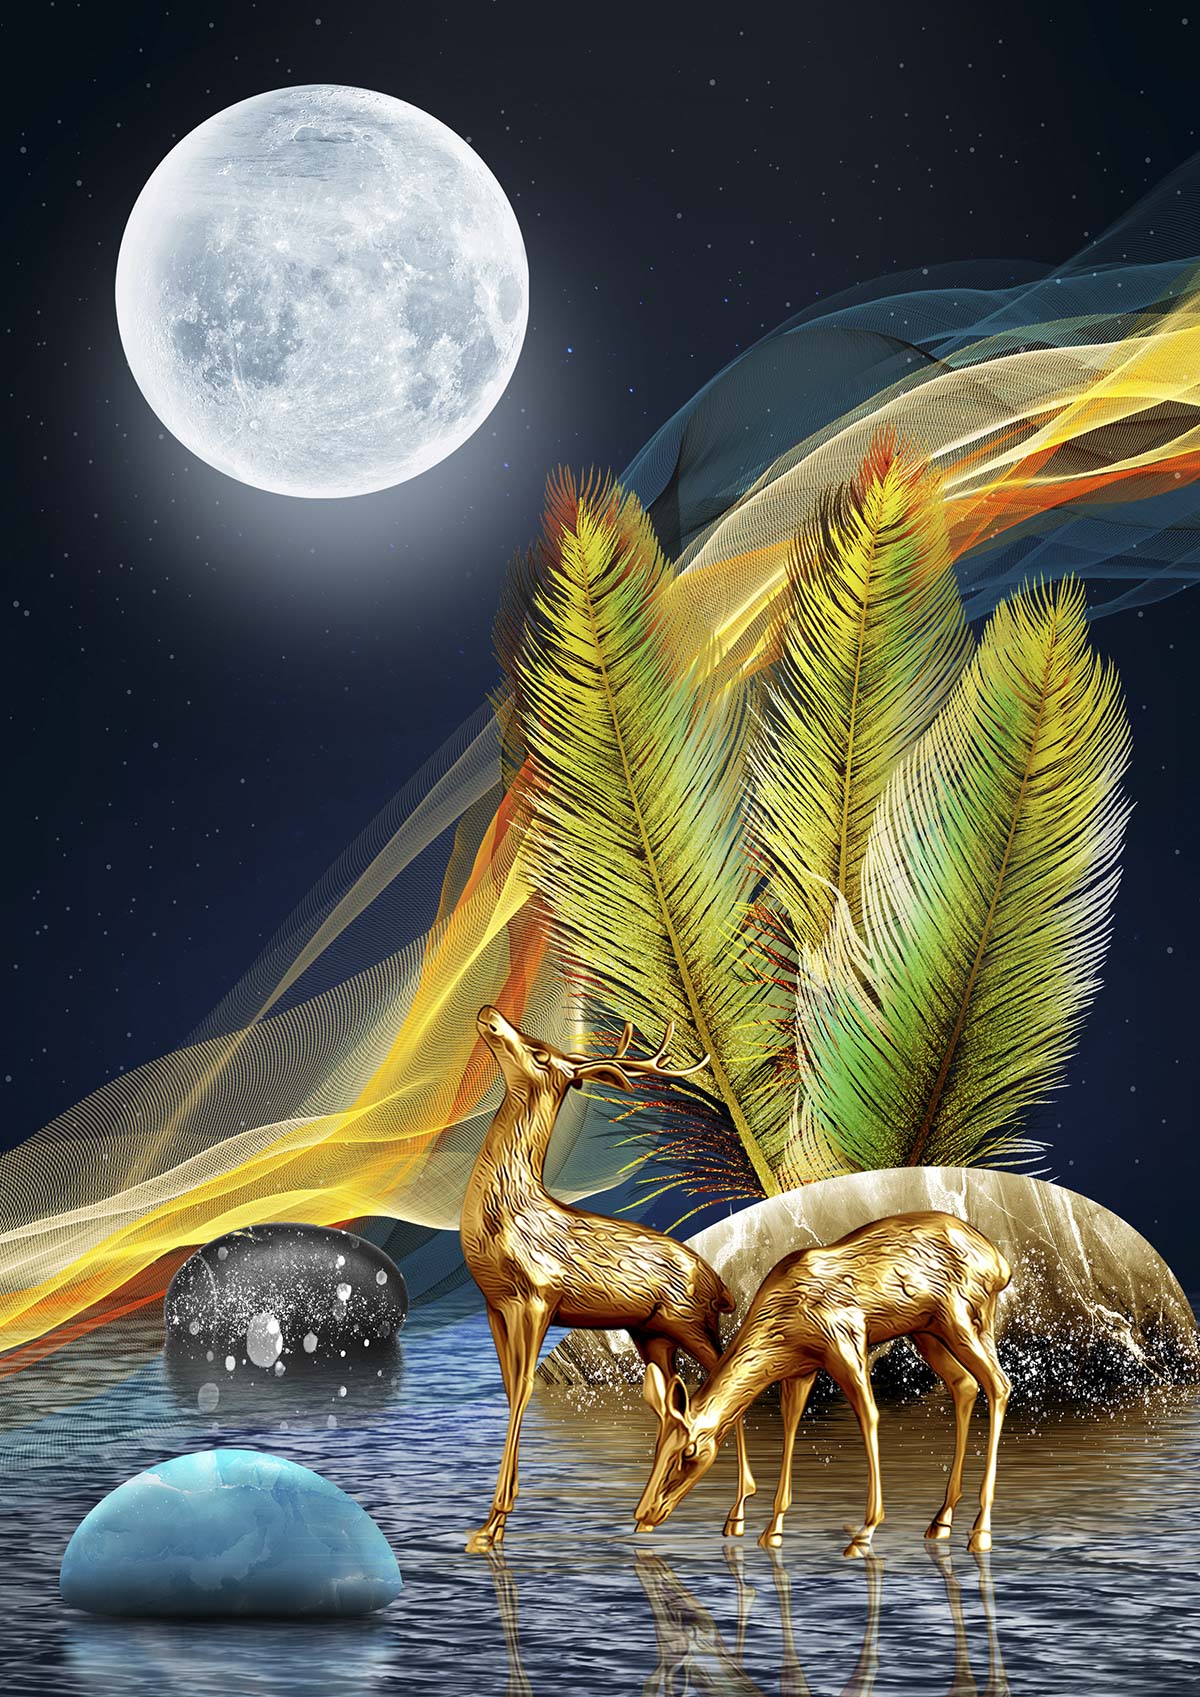 A golden deer standing in water with palm leaves and a full moon